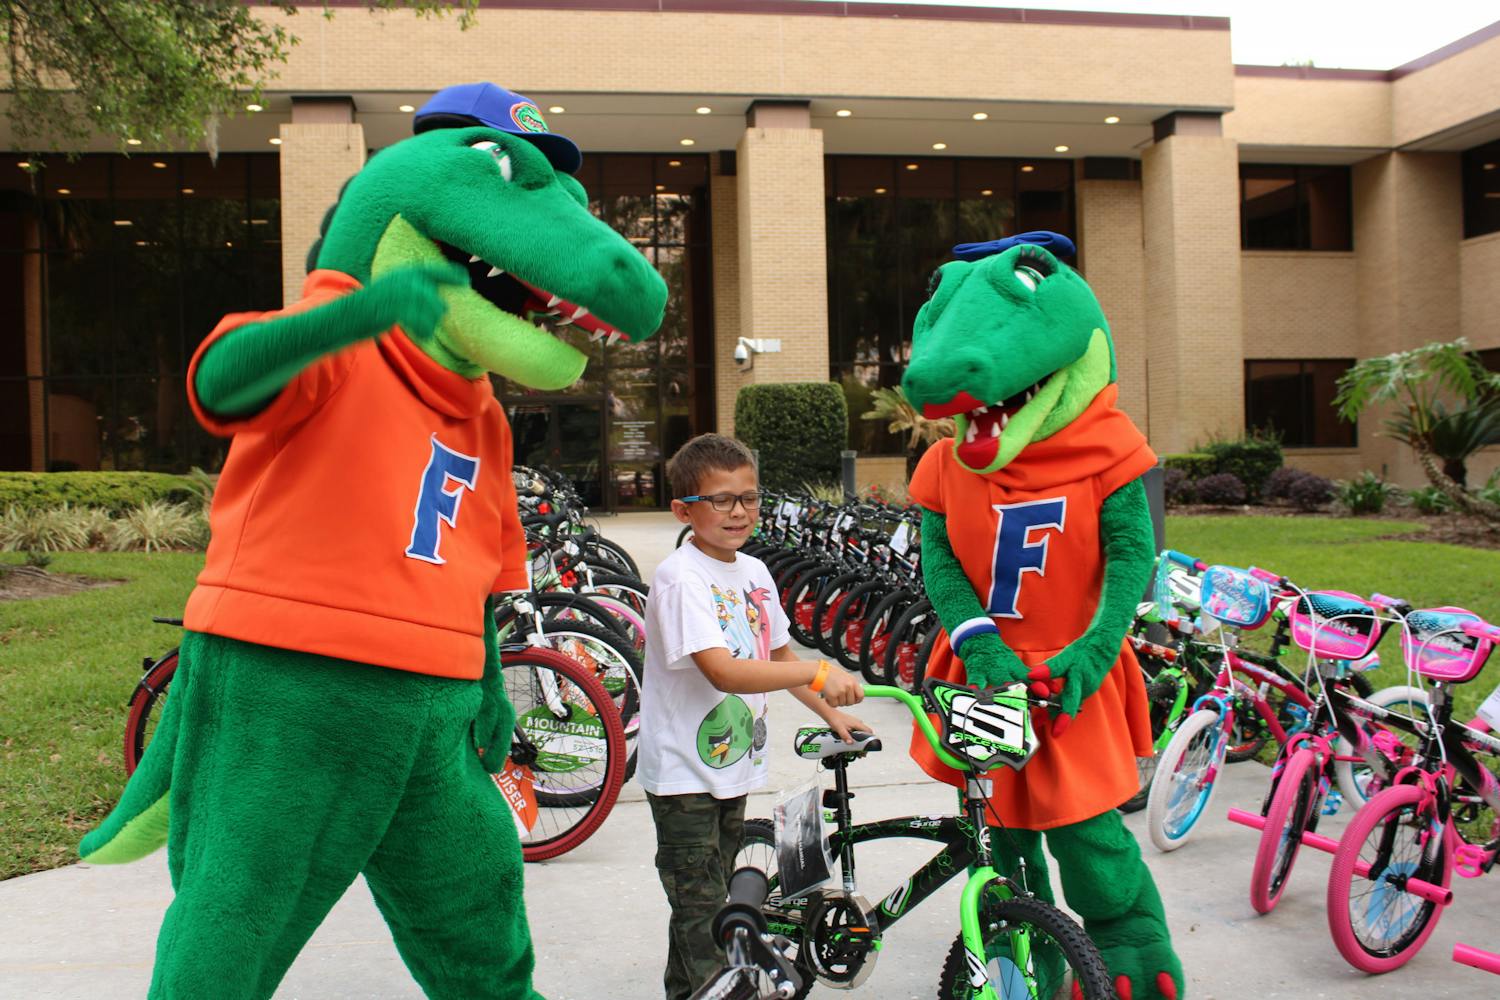 UF Health Shands Hospital gave away 86 bikes and 13 children's cars at the Bike Rodeo, Safety and Health Fair on Saturday, March 25, 2023.